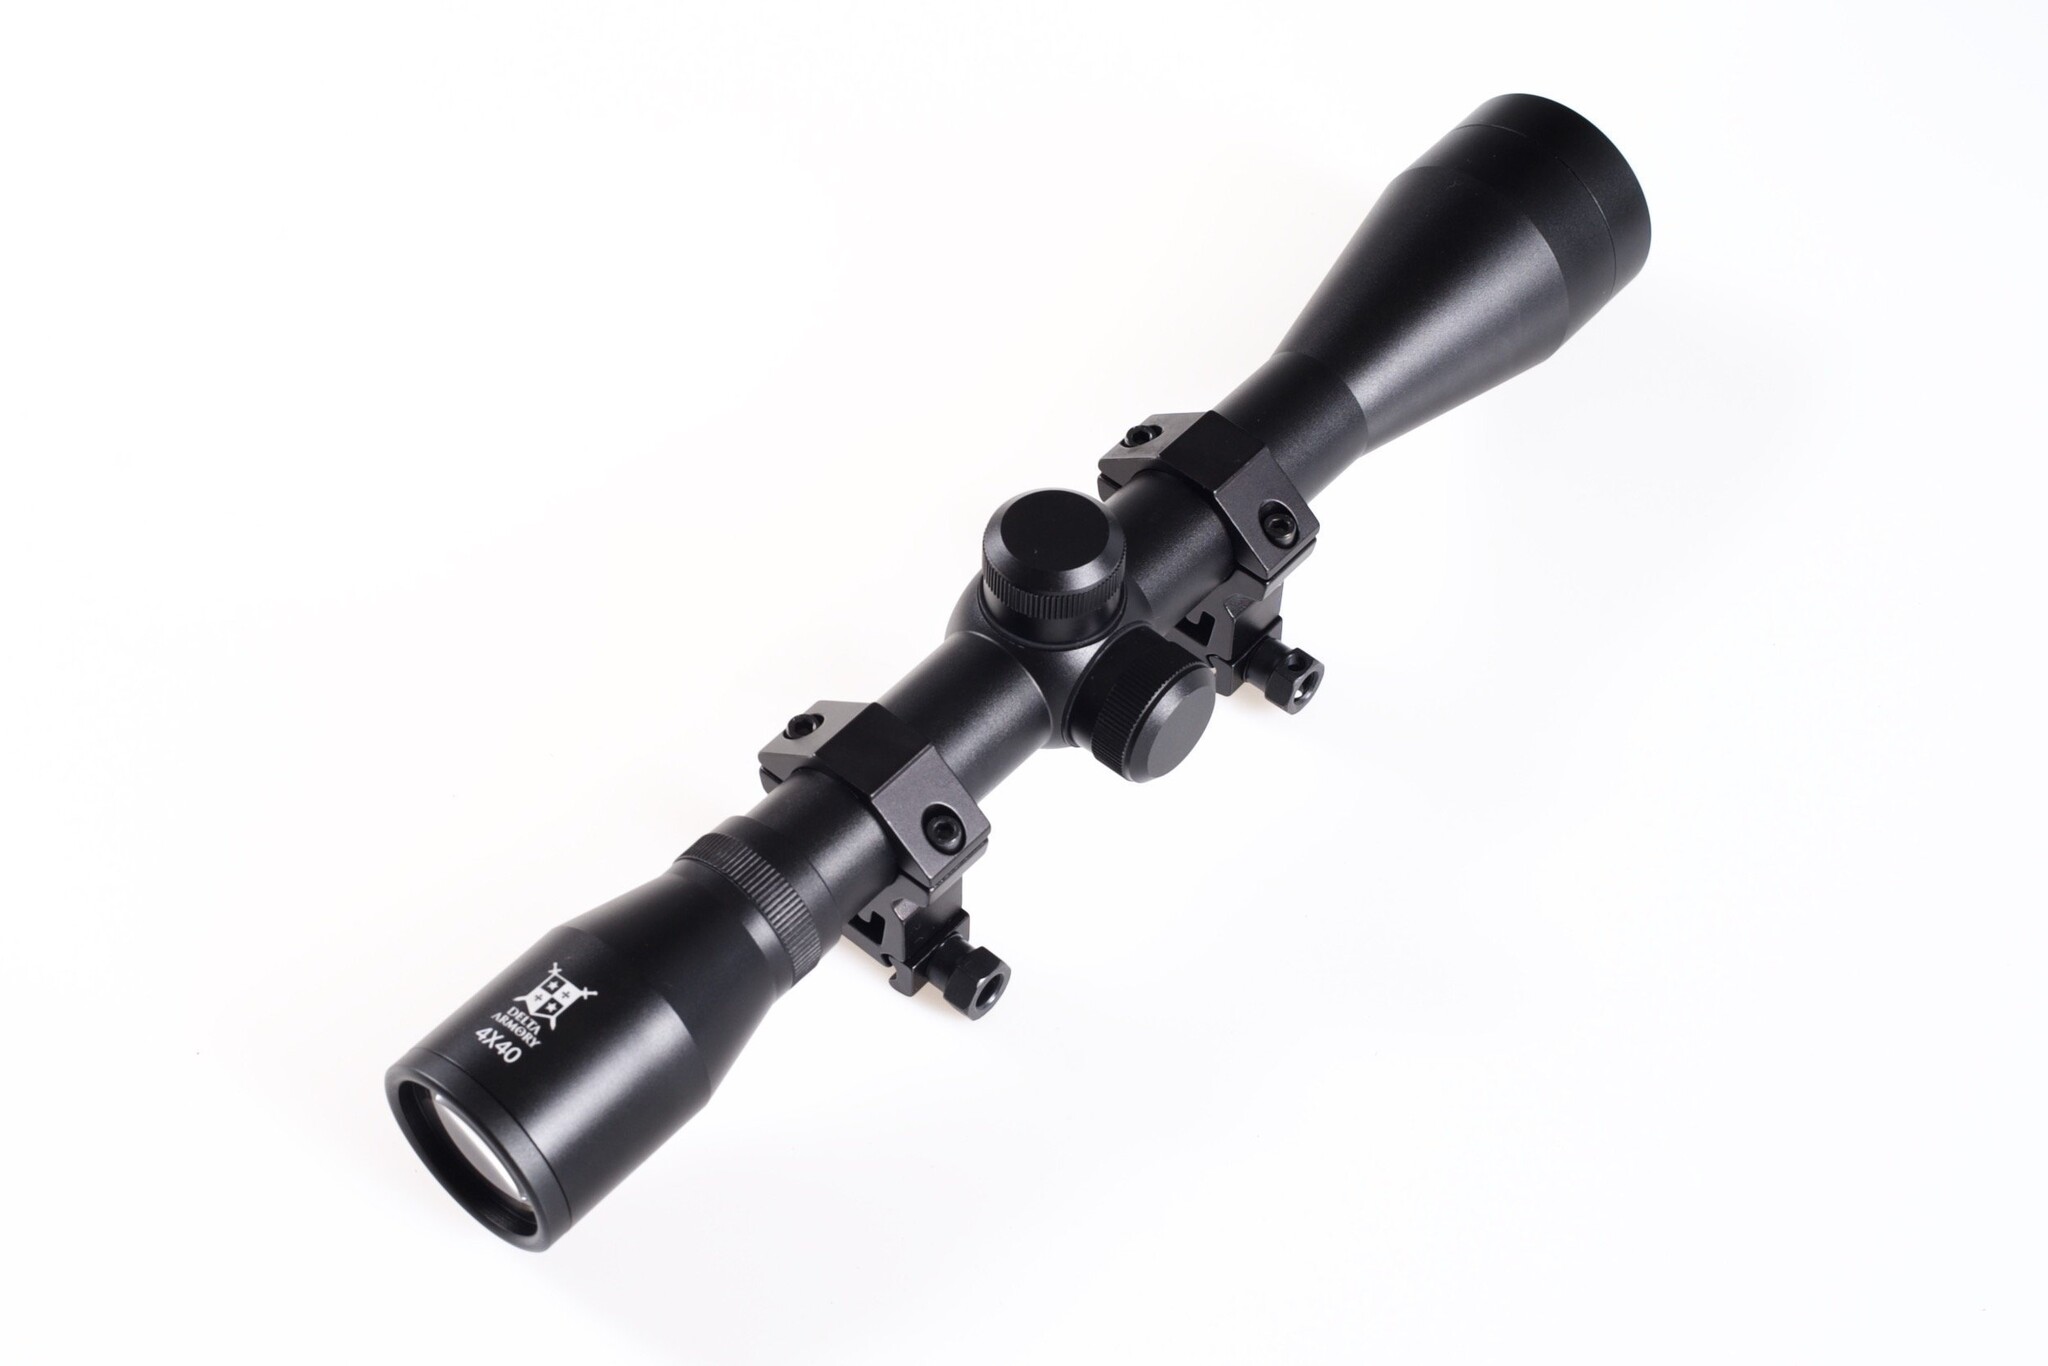 Delta Armory 4x40 rifle scope with mounting rings - BK